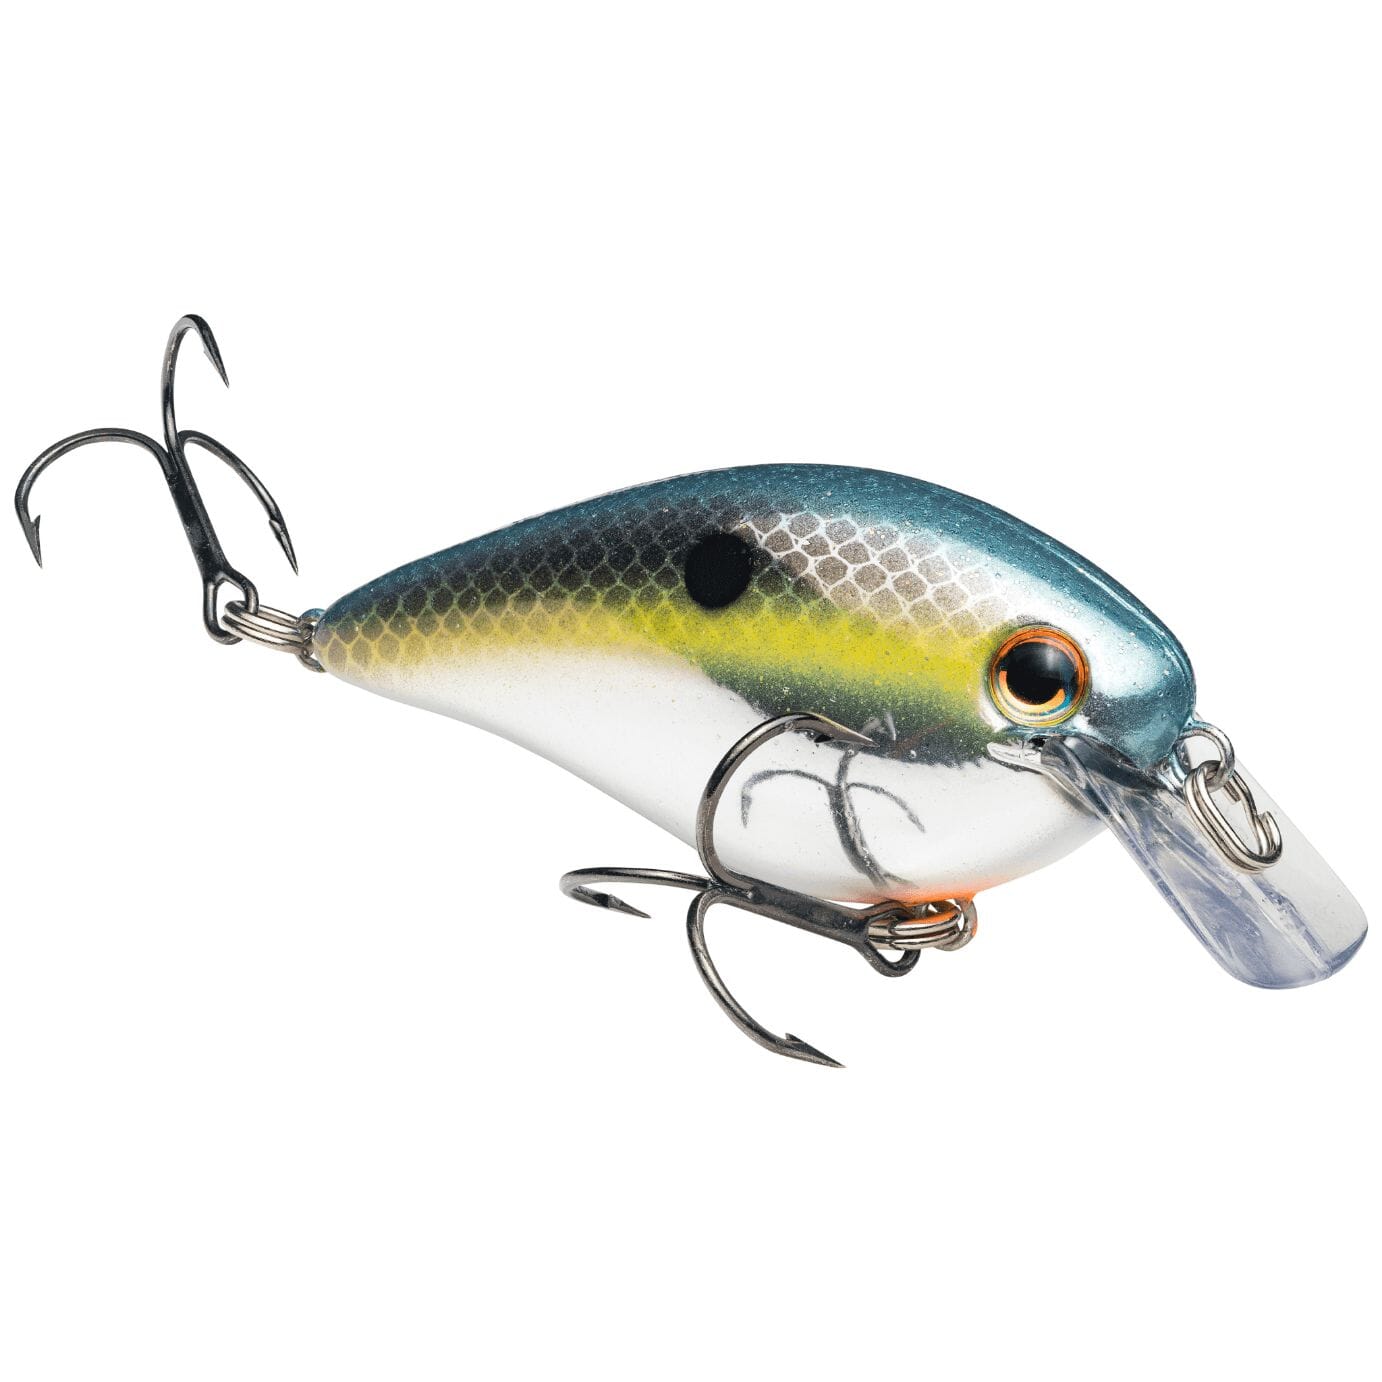 Hammond's Fishing Center - Strike King Chick Magnet in 2 colors showed up.  Sexy Shad and Blue Rock Craw.